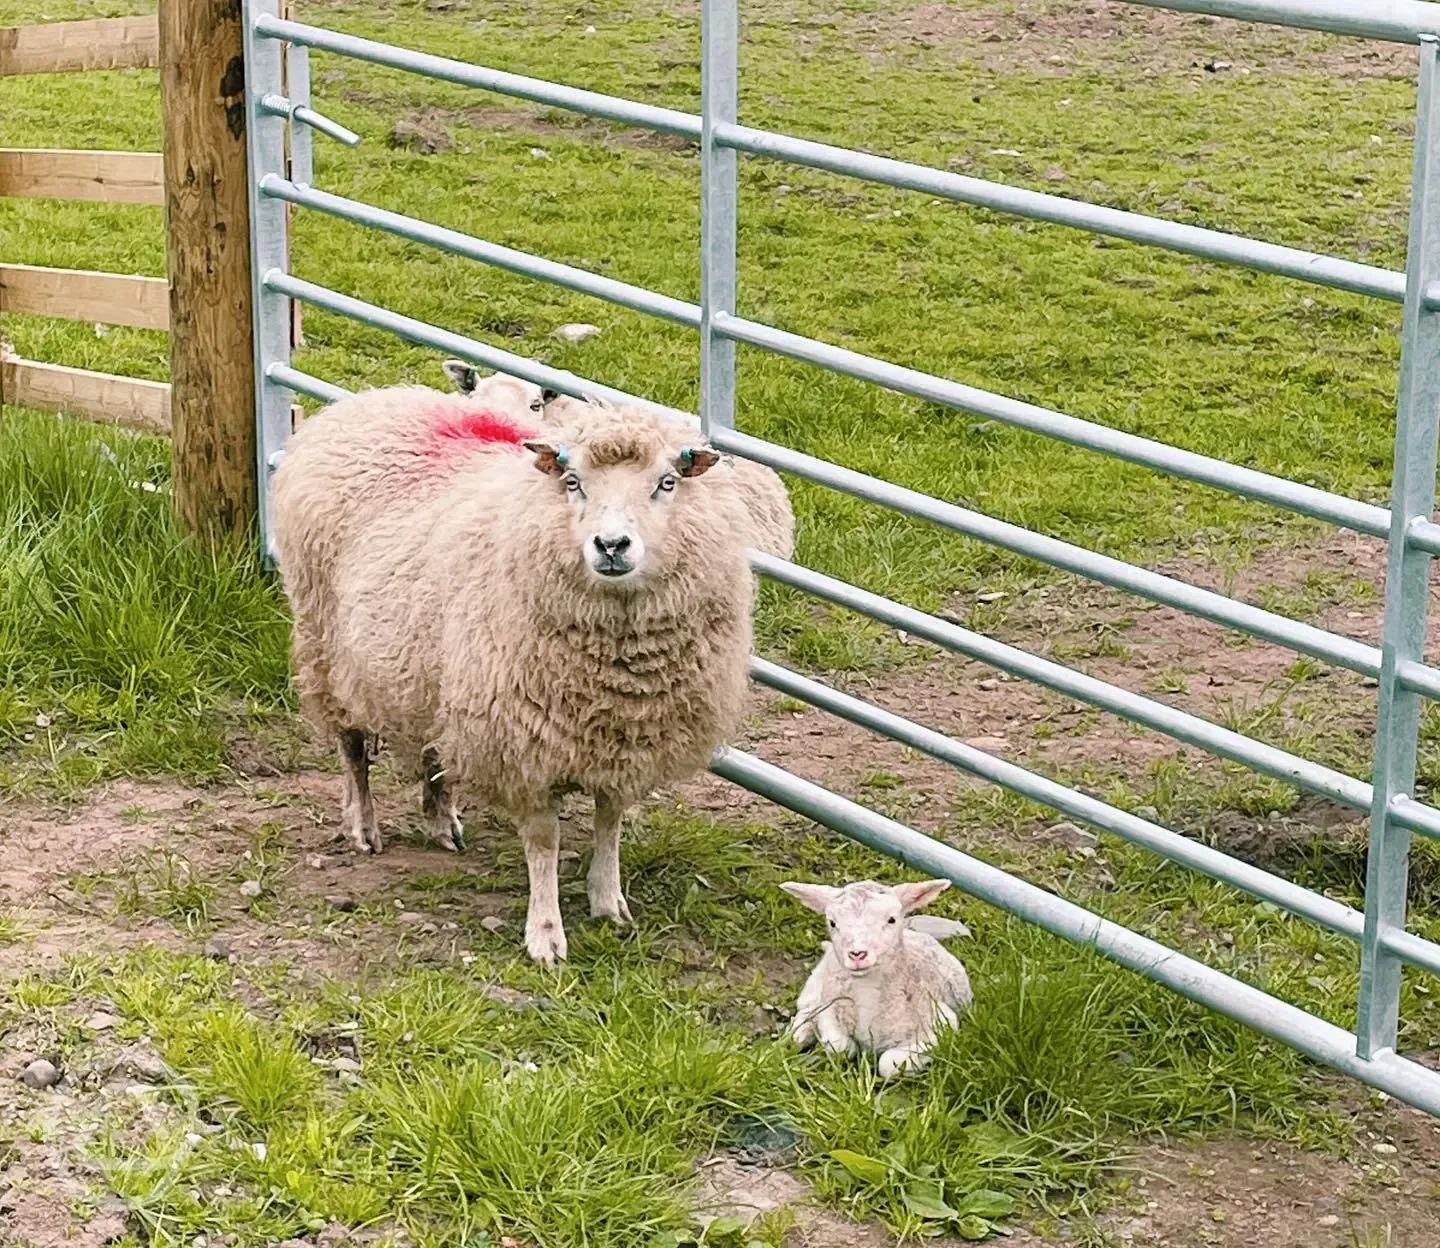 Sheep on site